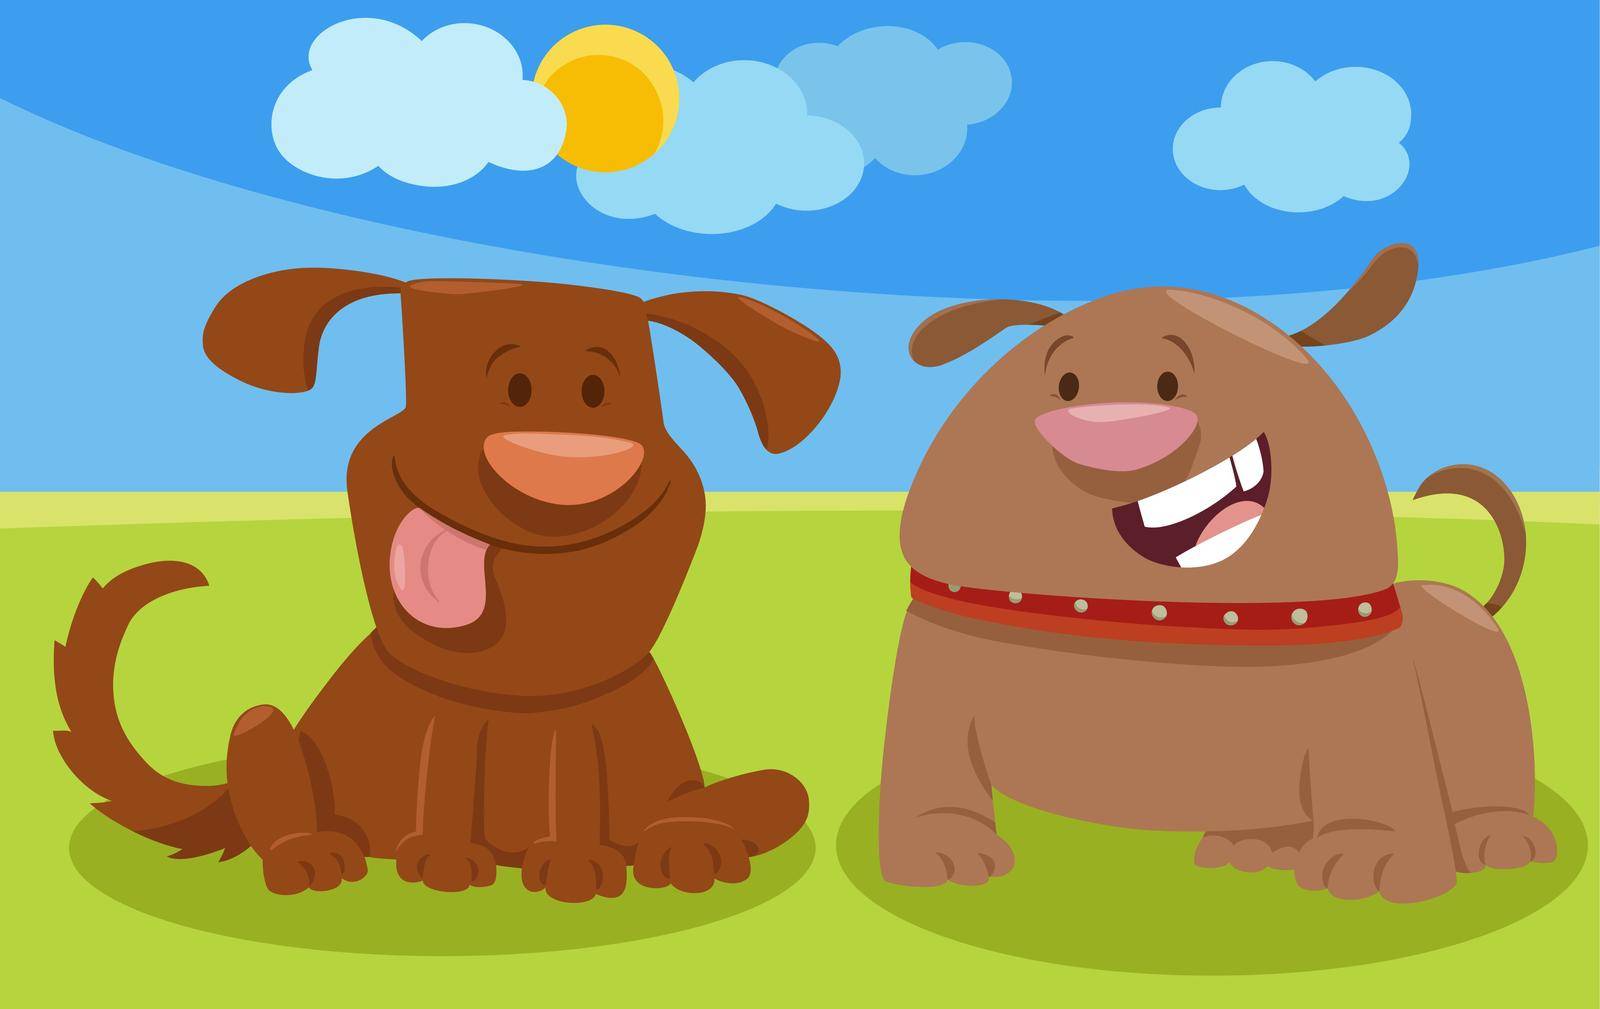 Cartoon illustration of two funny dogs comic animal characters